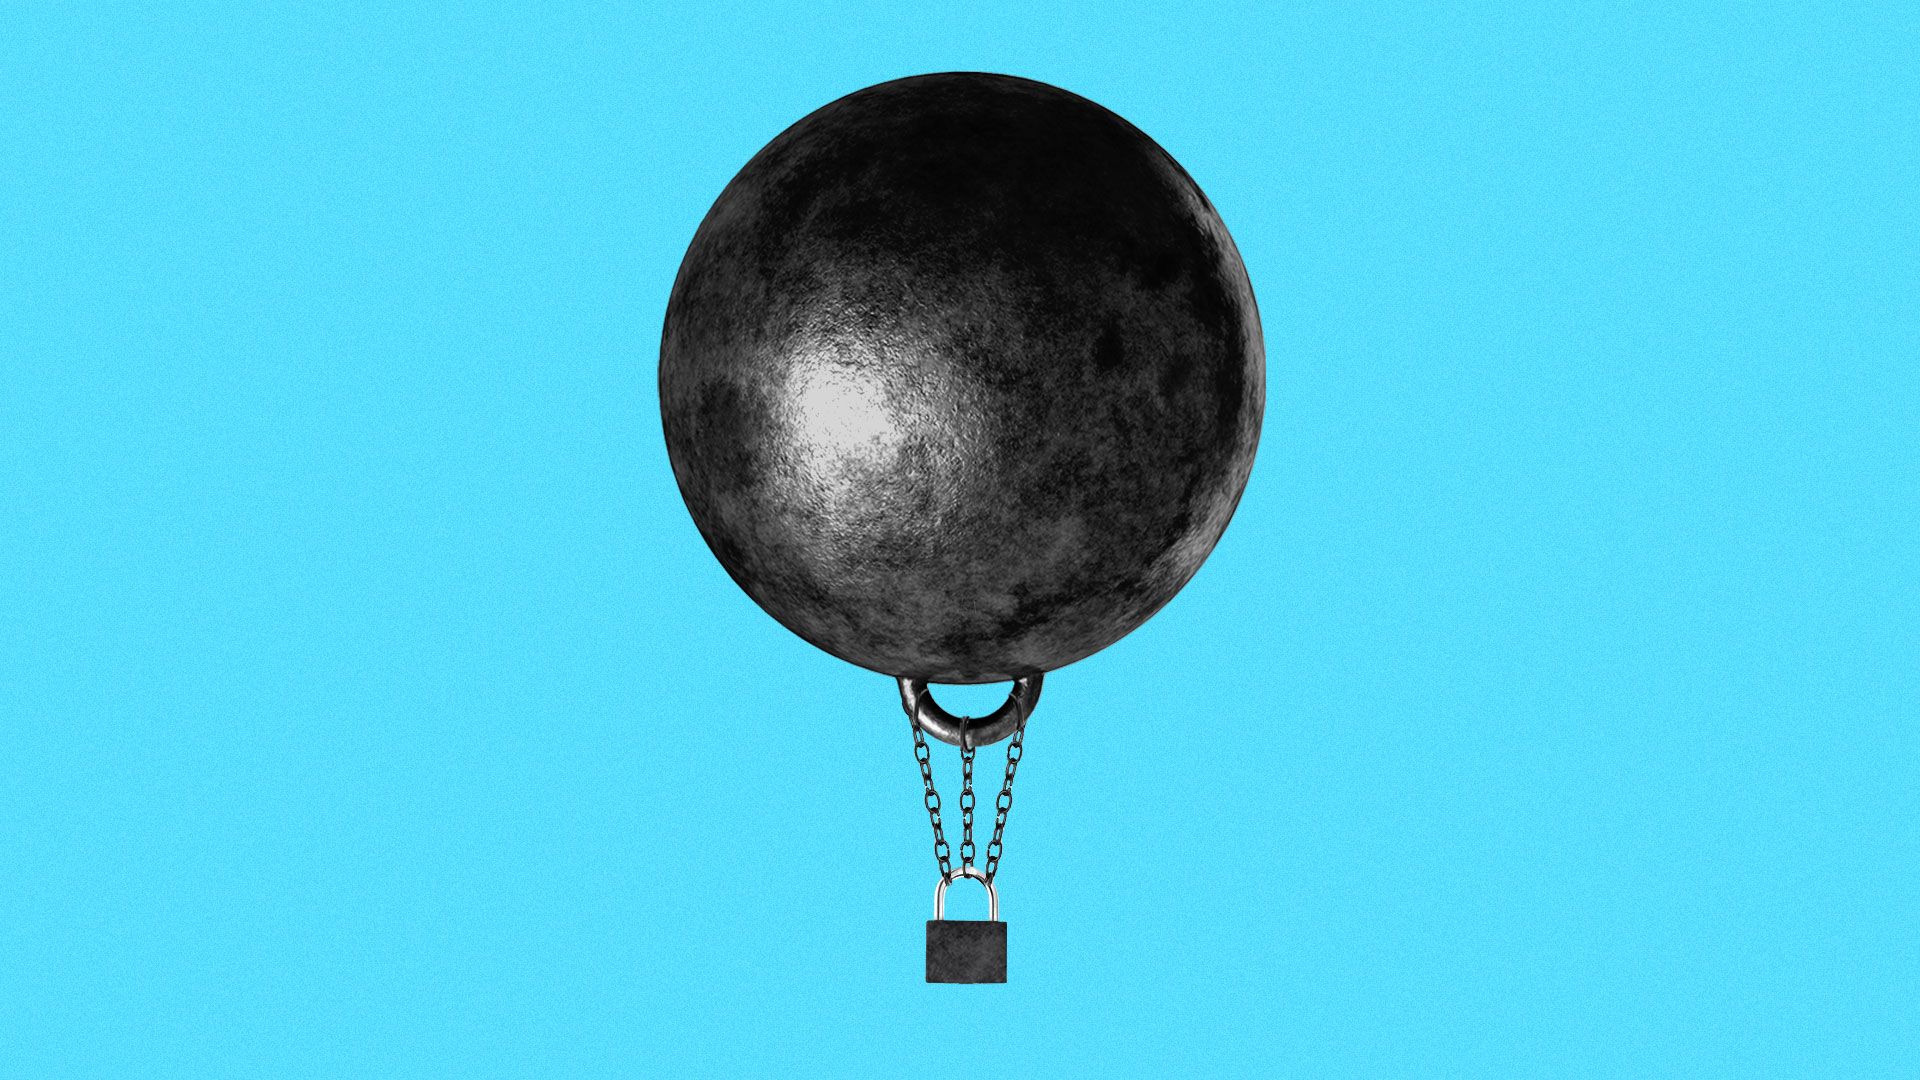 Illustration of a hot air balloon made out of a ball and chain and a padlock. 